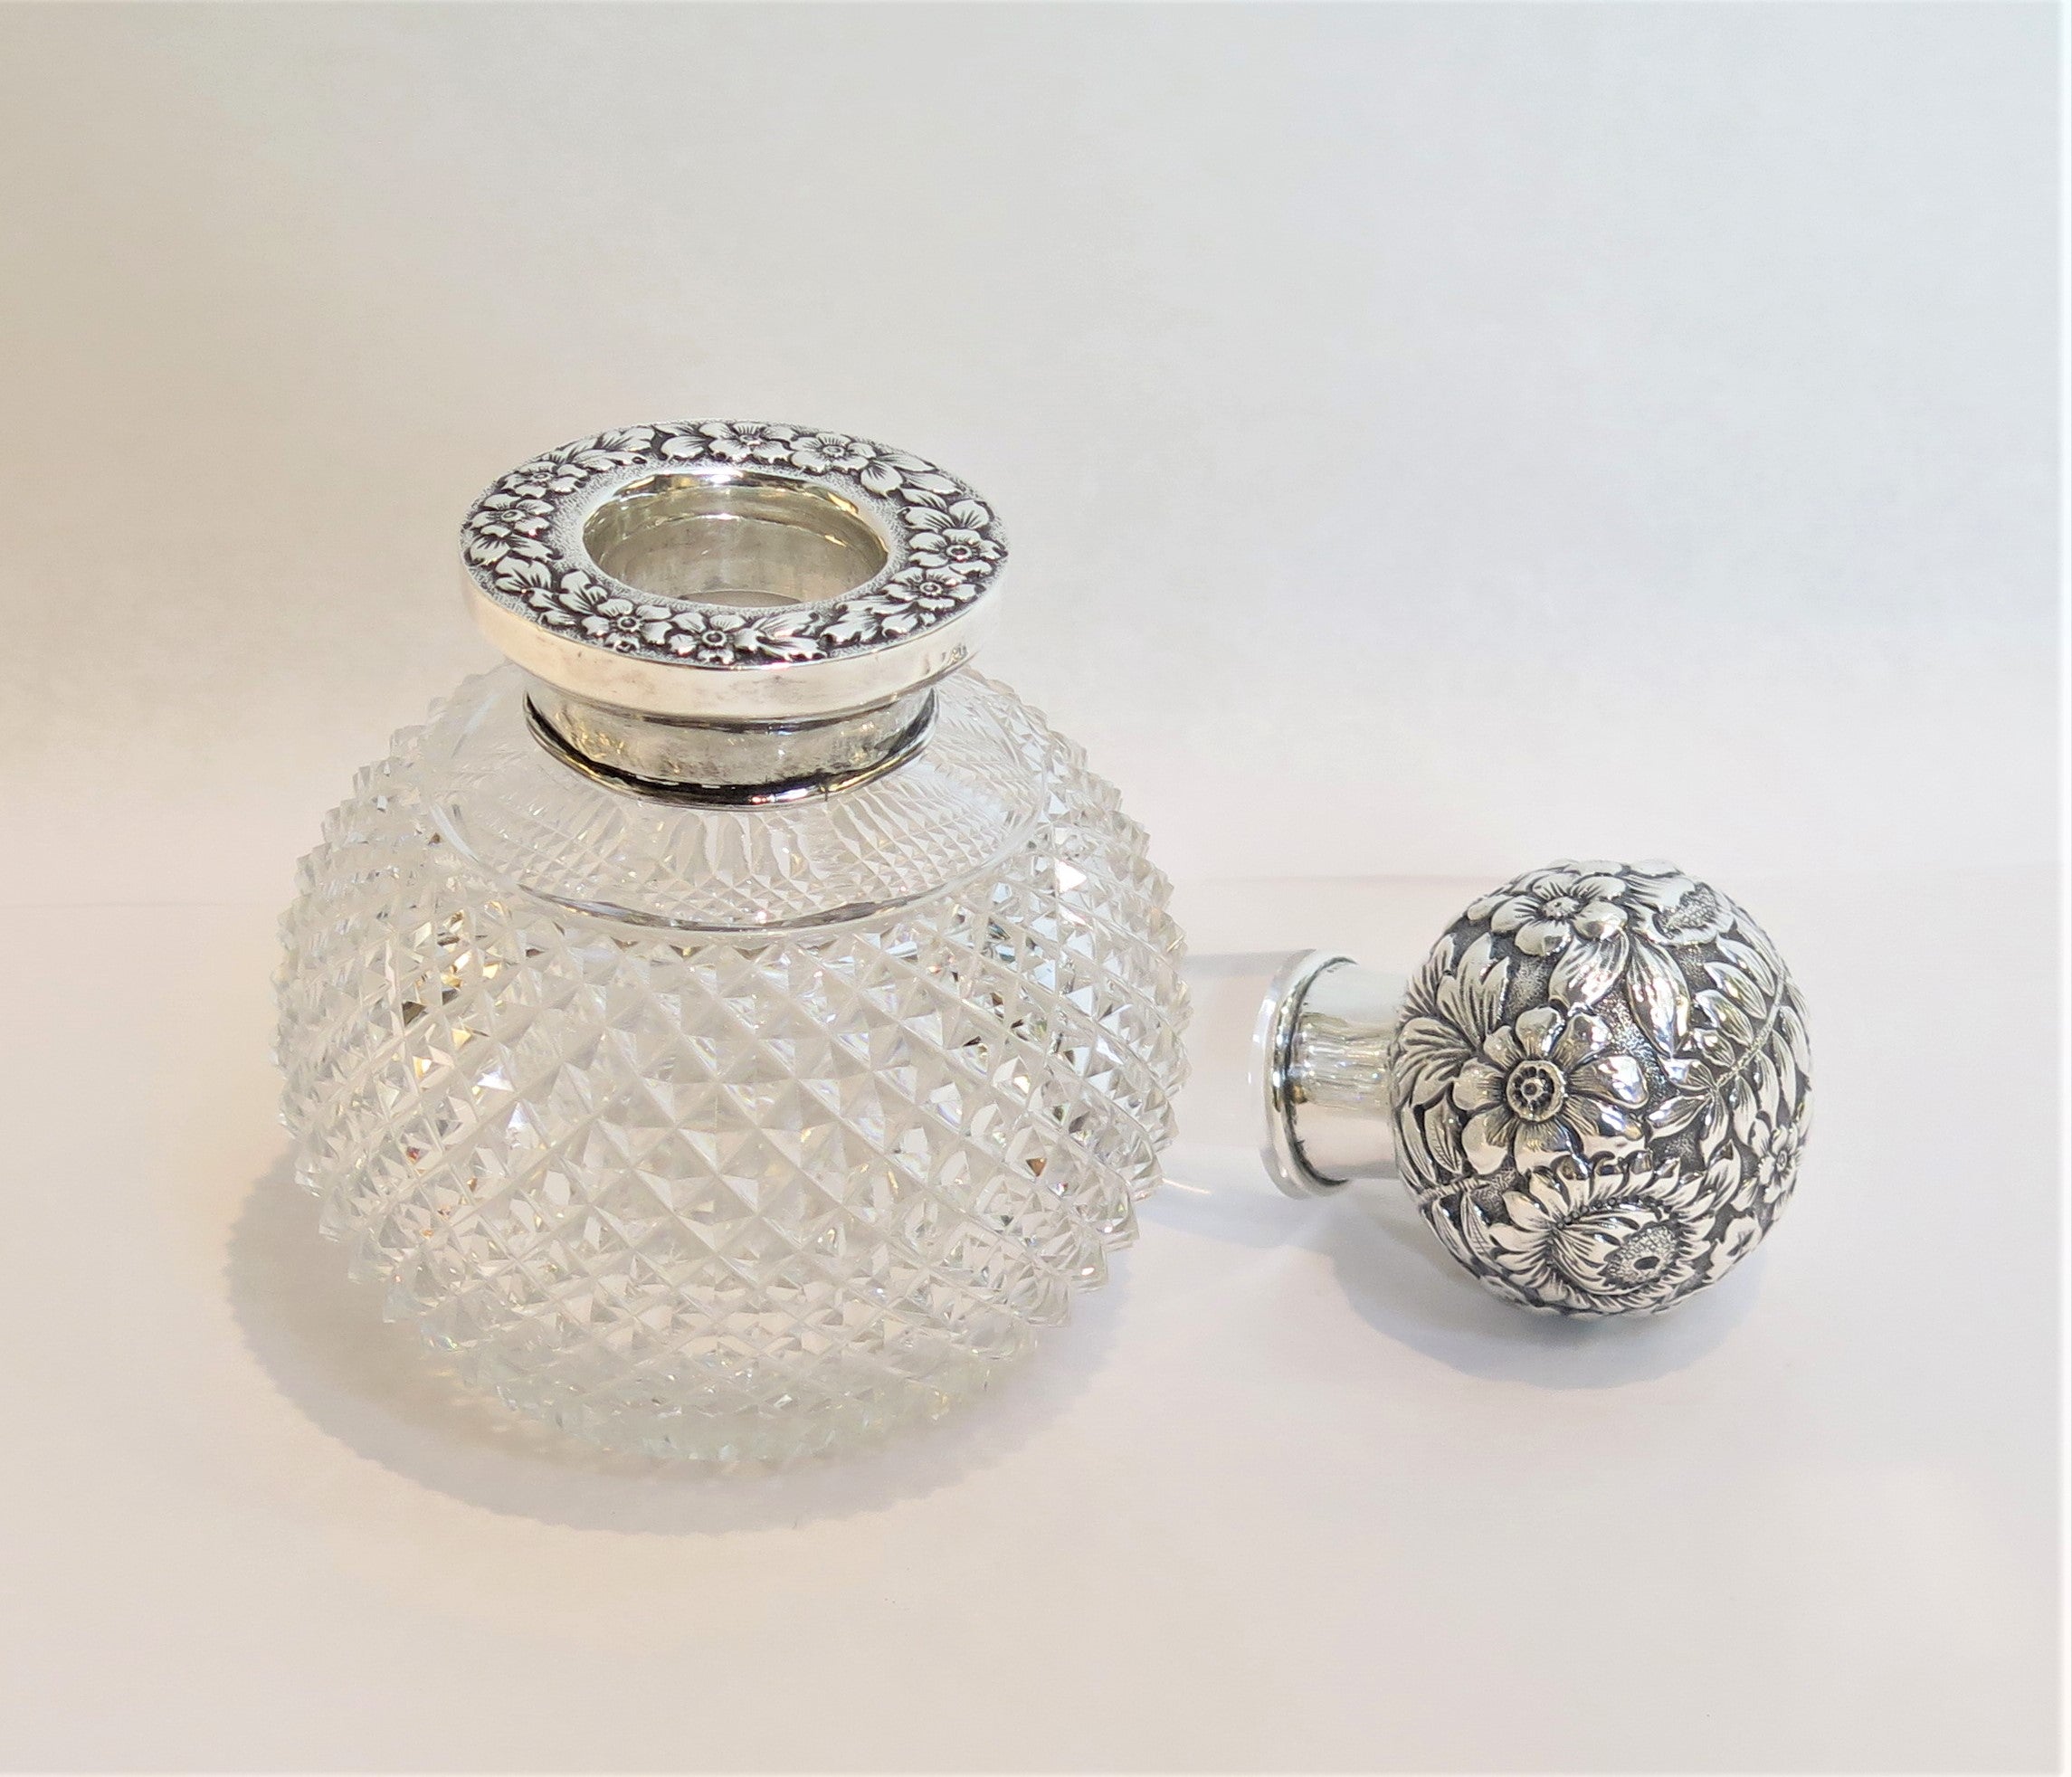 Black, Starr & Frost Cut Glass and Sterling Perfume Bottle